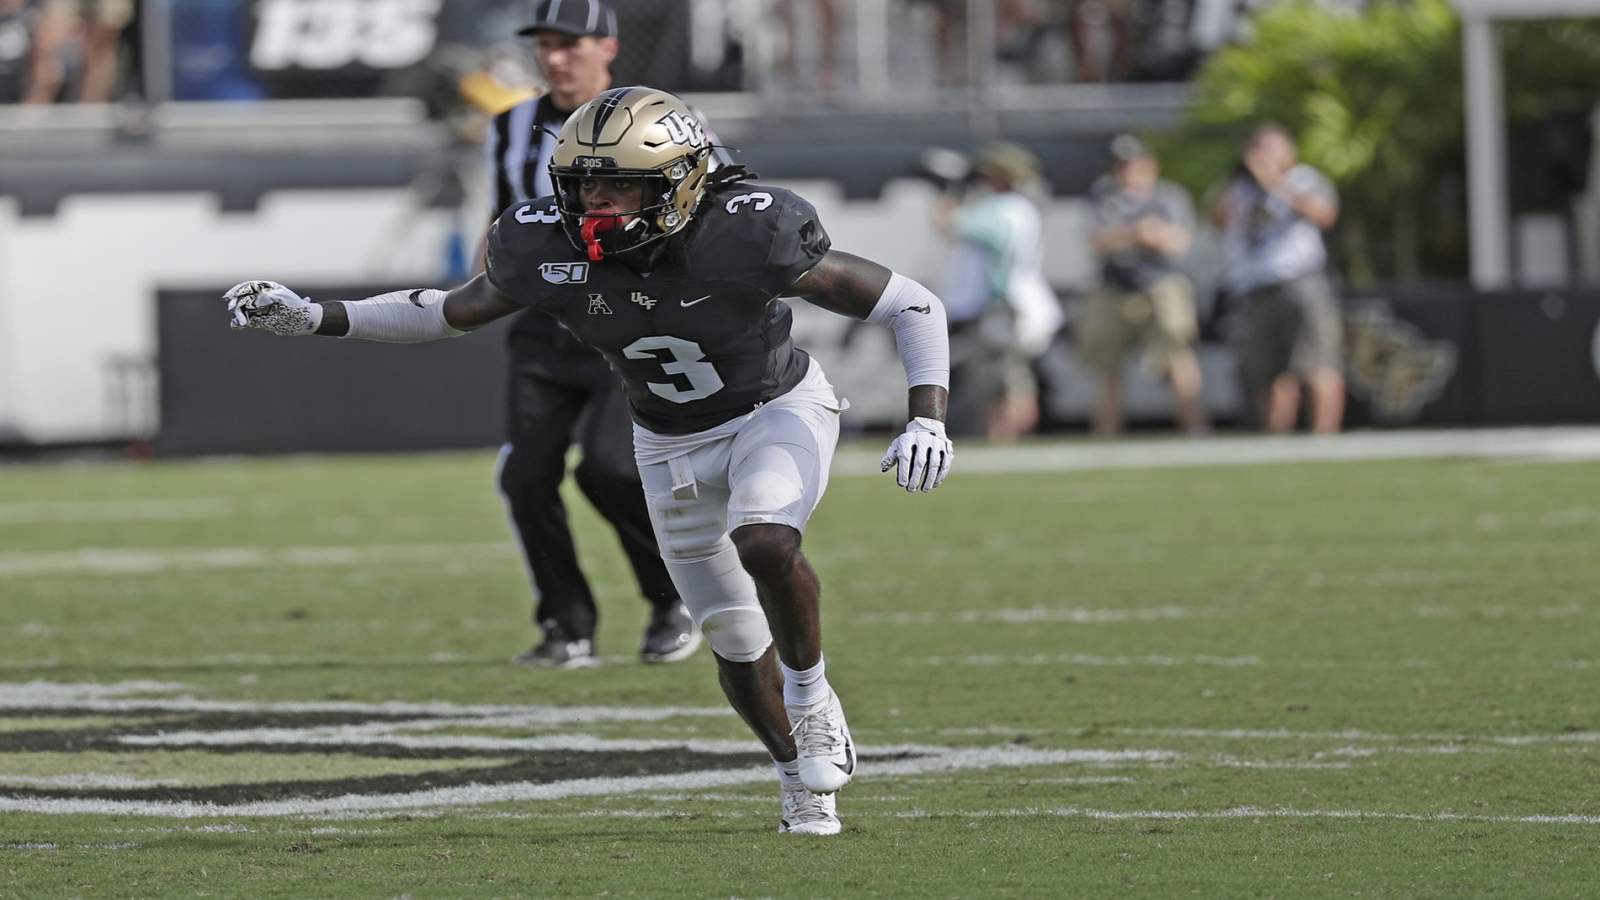 ‘We have to be better than that:’ UCF coach responds after player arrest